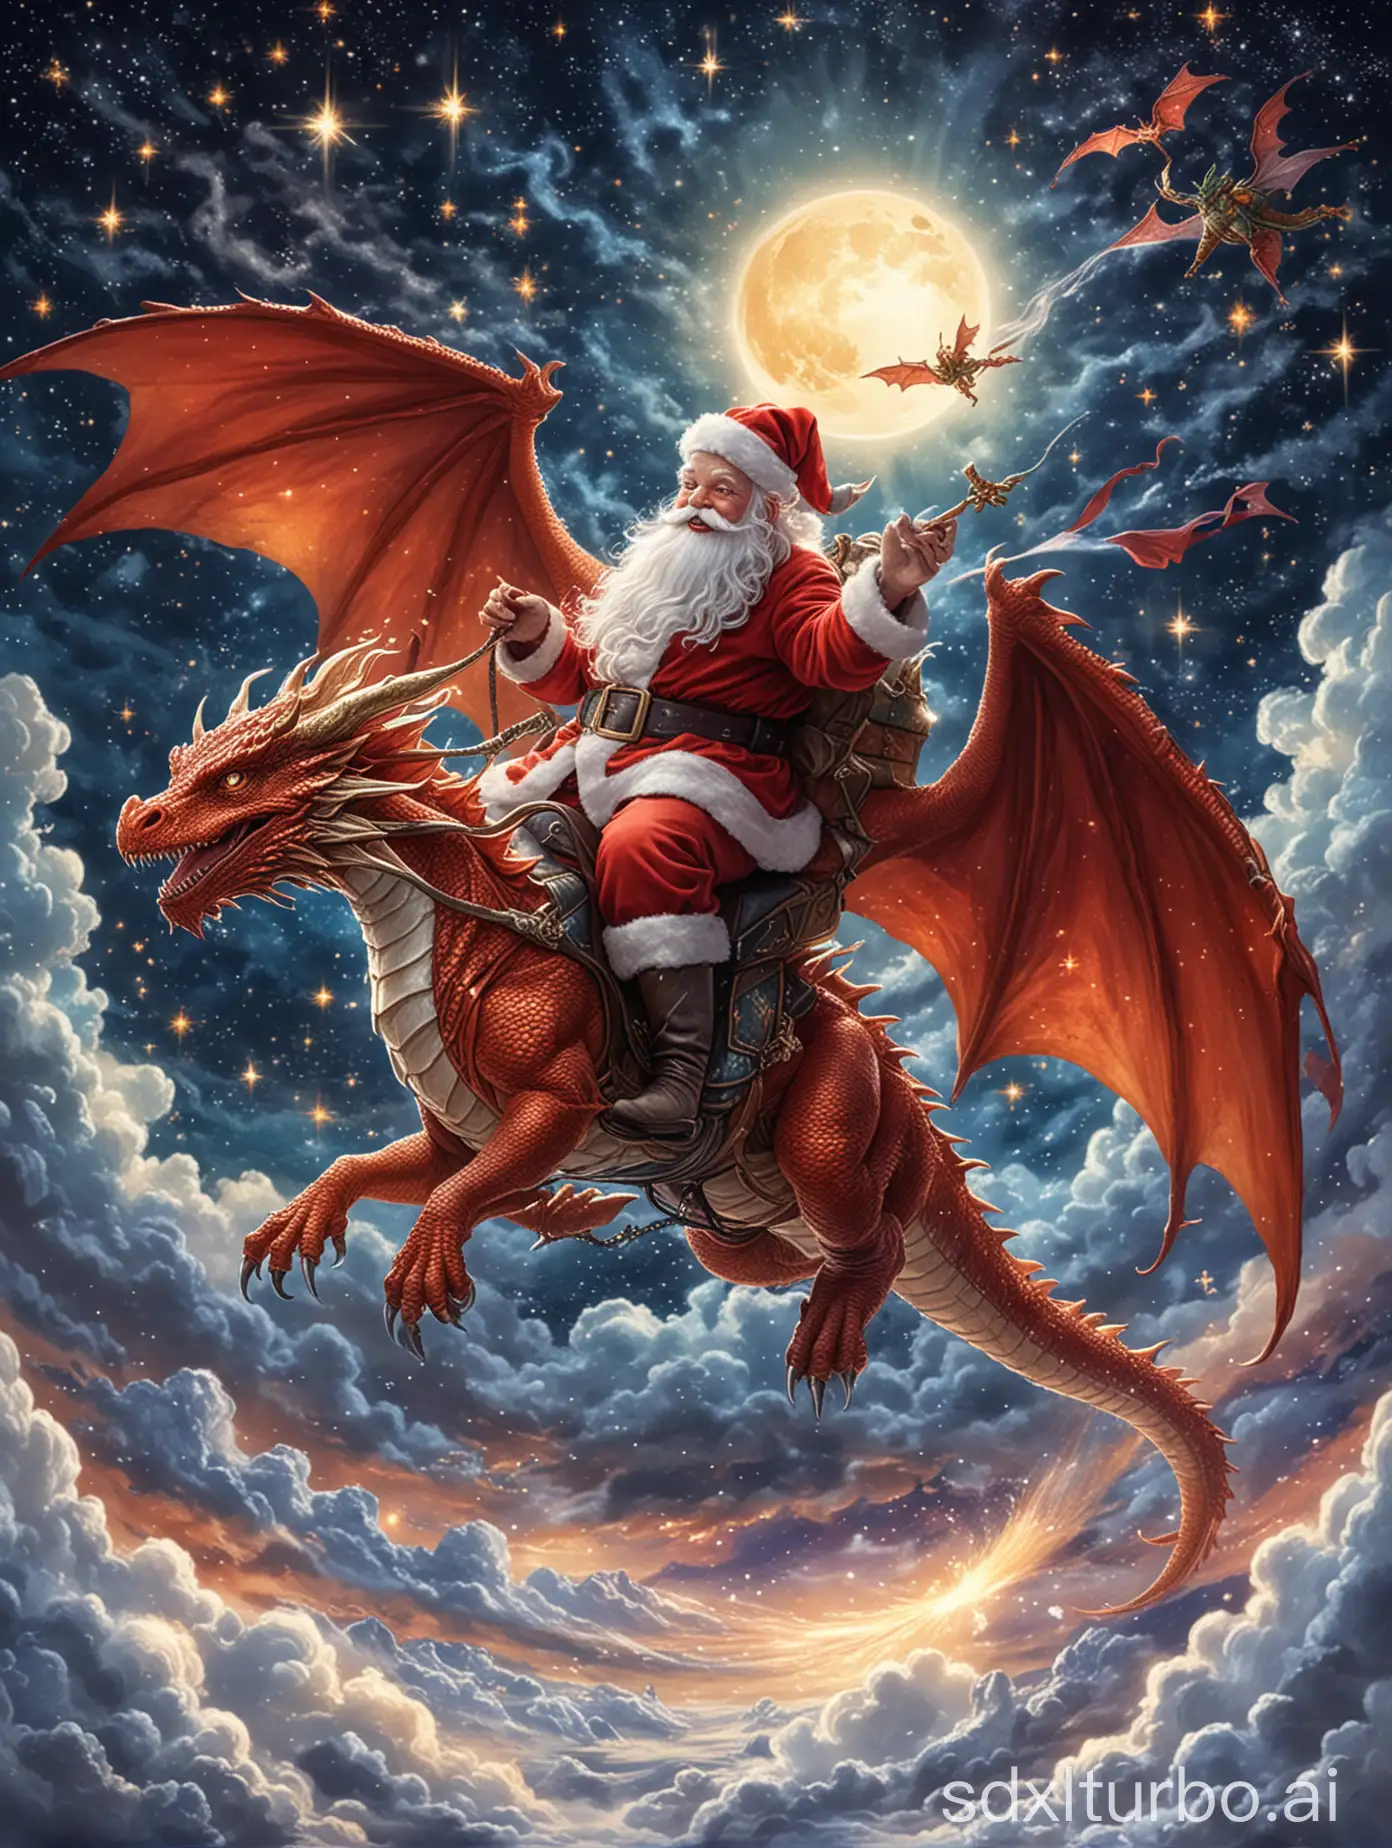 Santa, like him riding on a sparkling flight dragon, which takes him up to the night sky, where stars are his only companions.